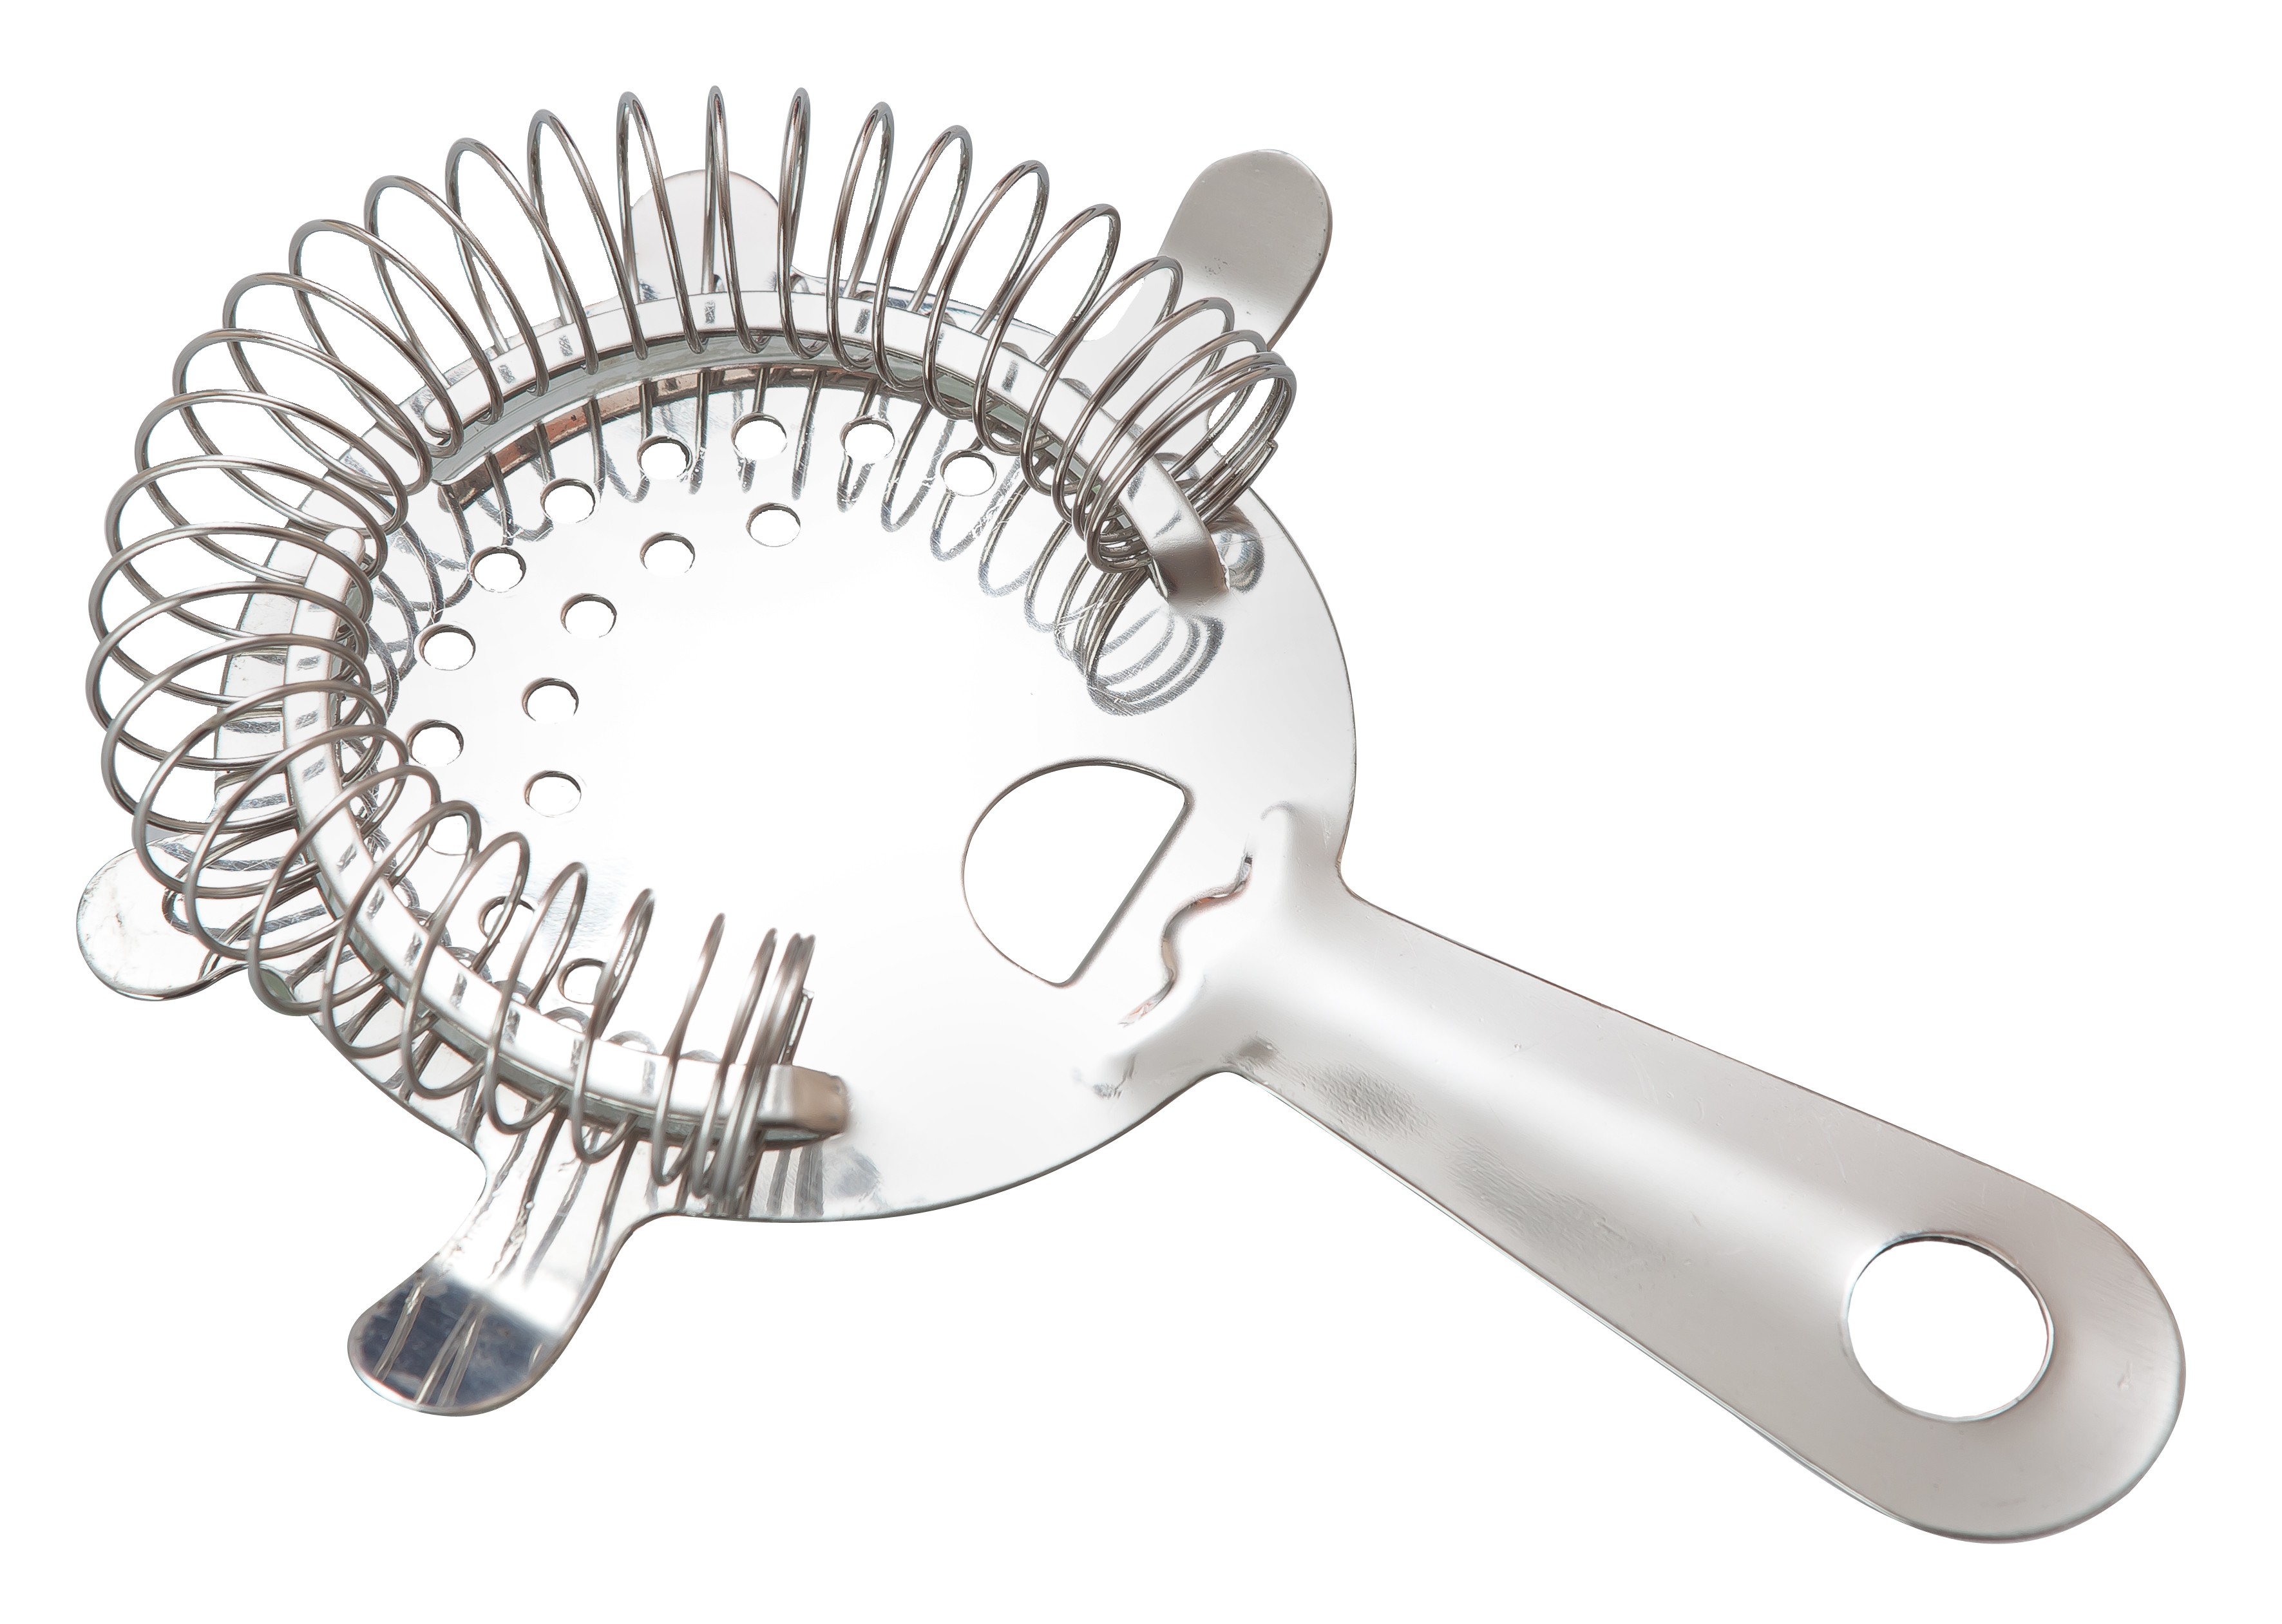 Stainless Steel Hawthorne Strainer 4 Prong